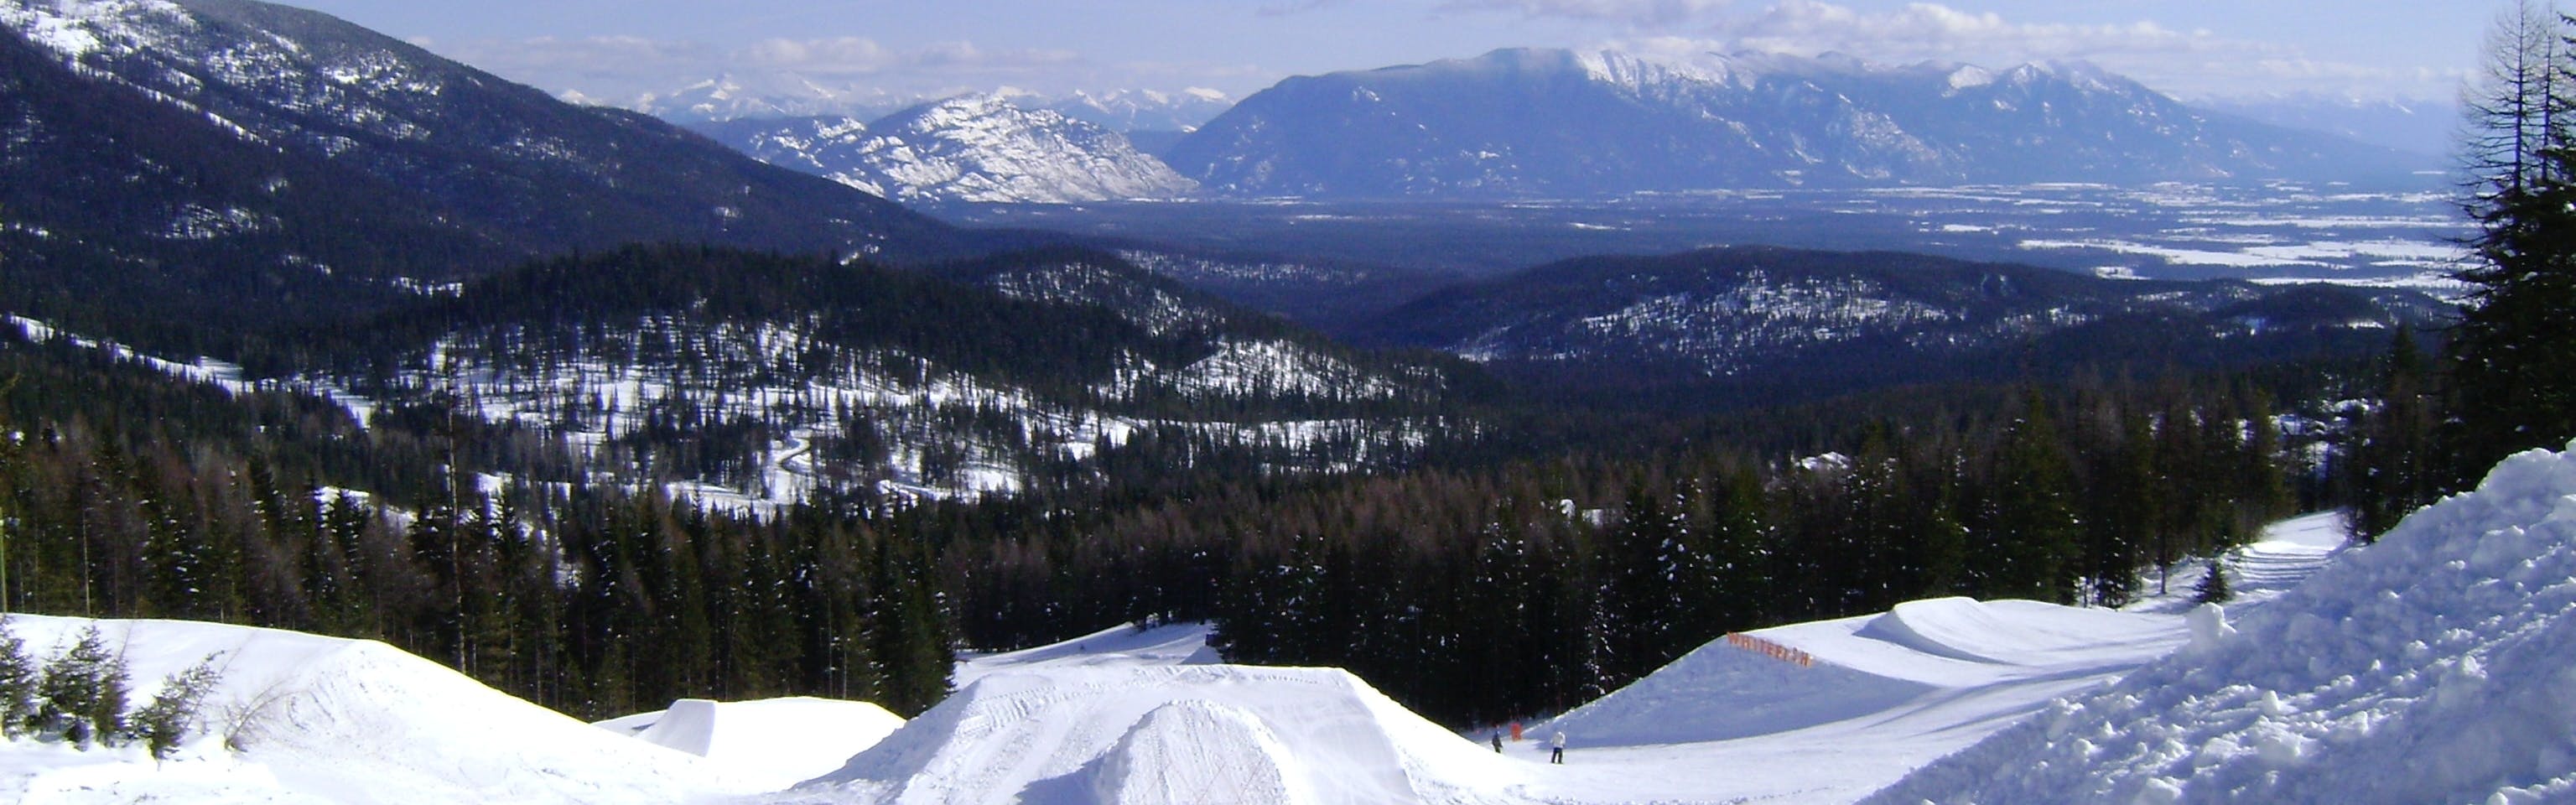 Ski jumps with trees and more mountains in the distancw